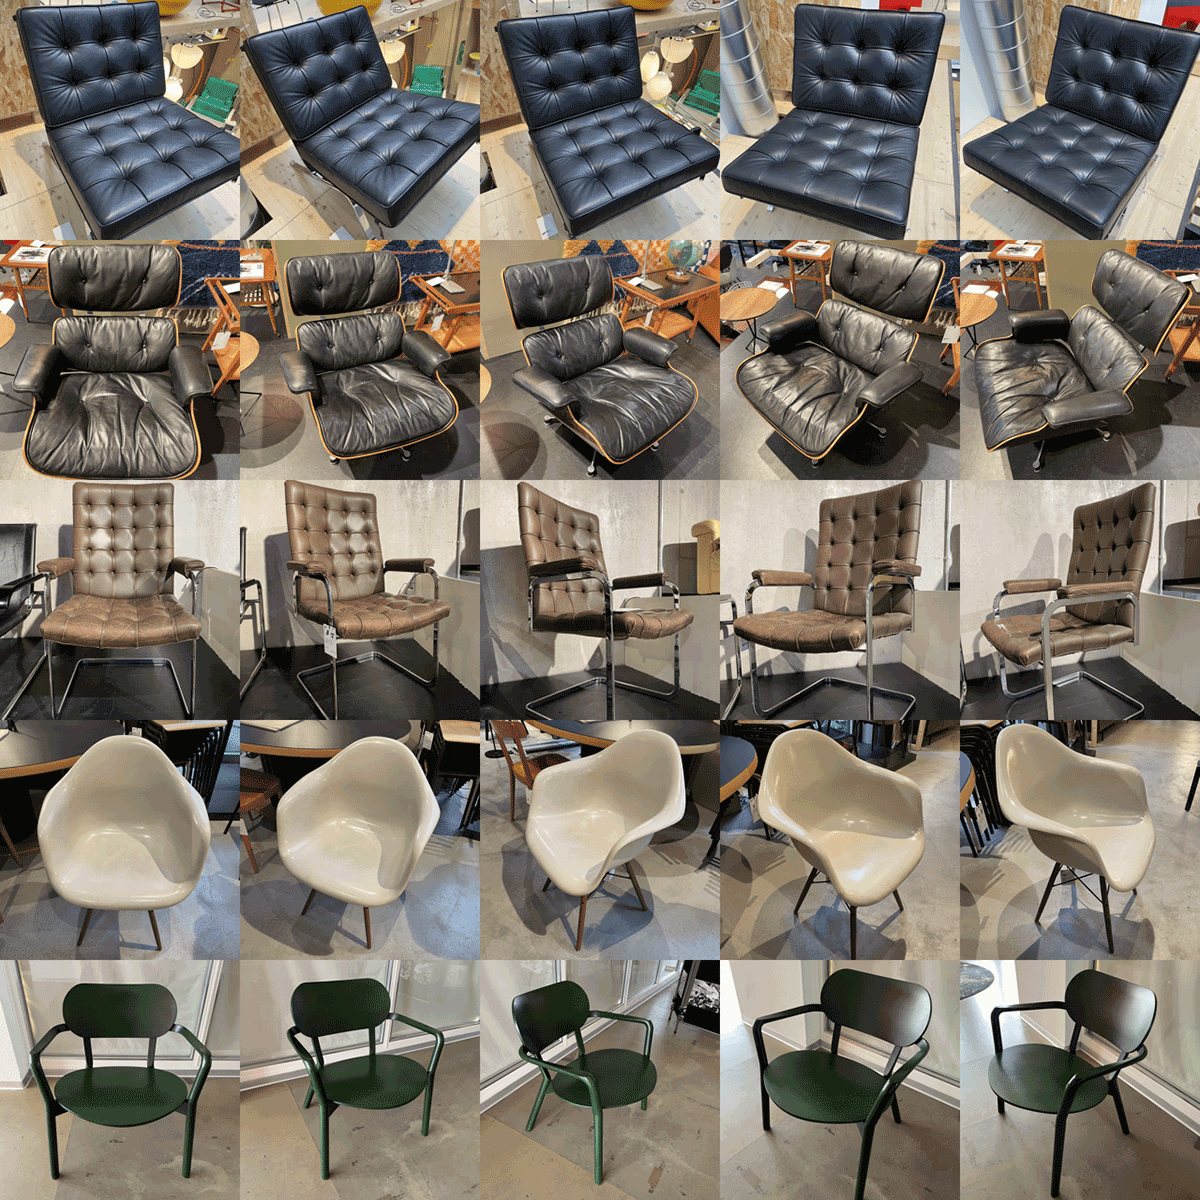 Figure 1. Images of five different chairs representing the core design aesthetics of chairs produced by a sample furniture design company